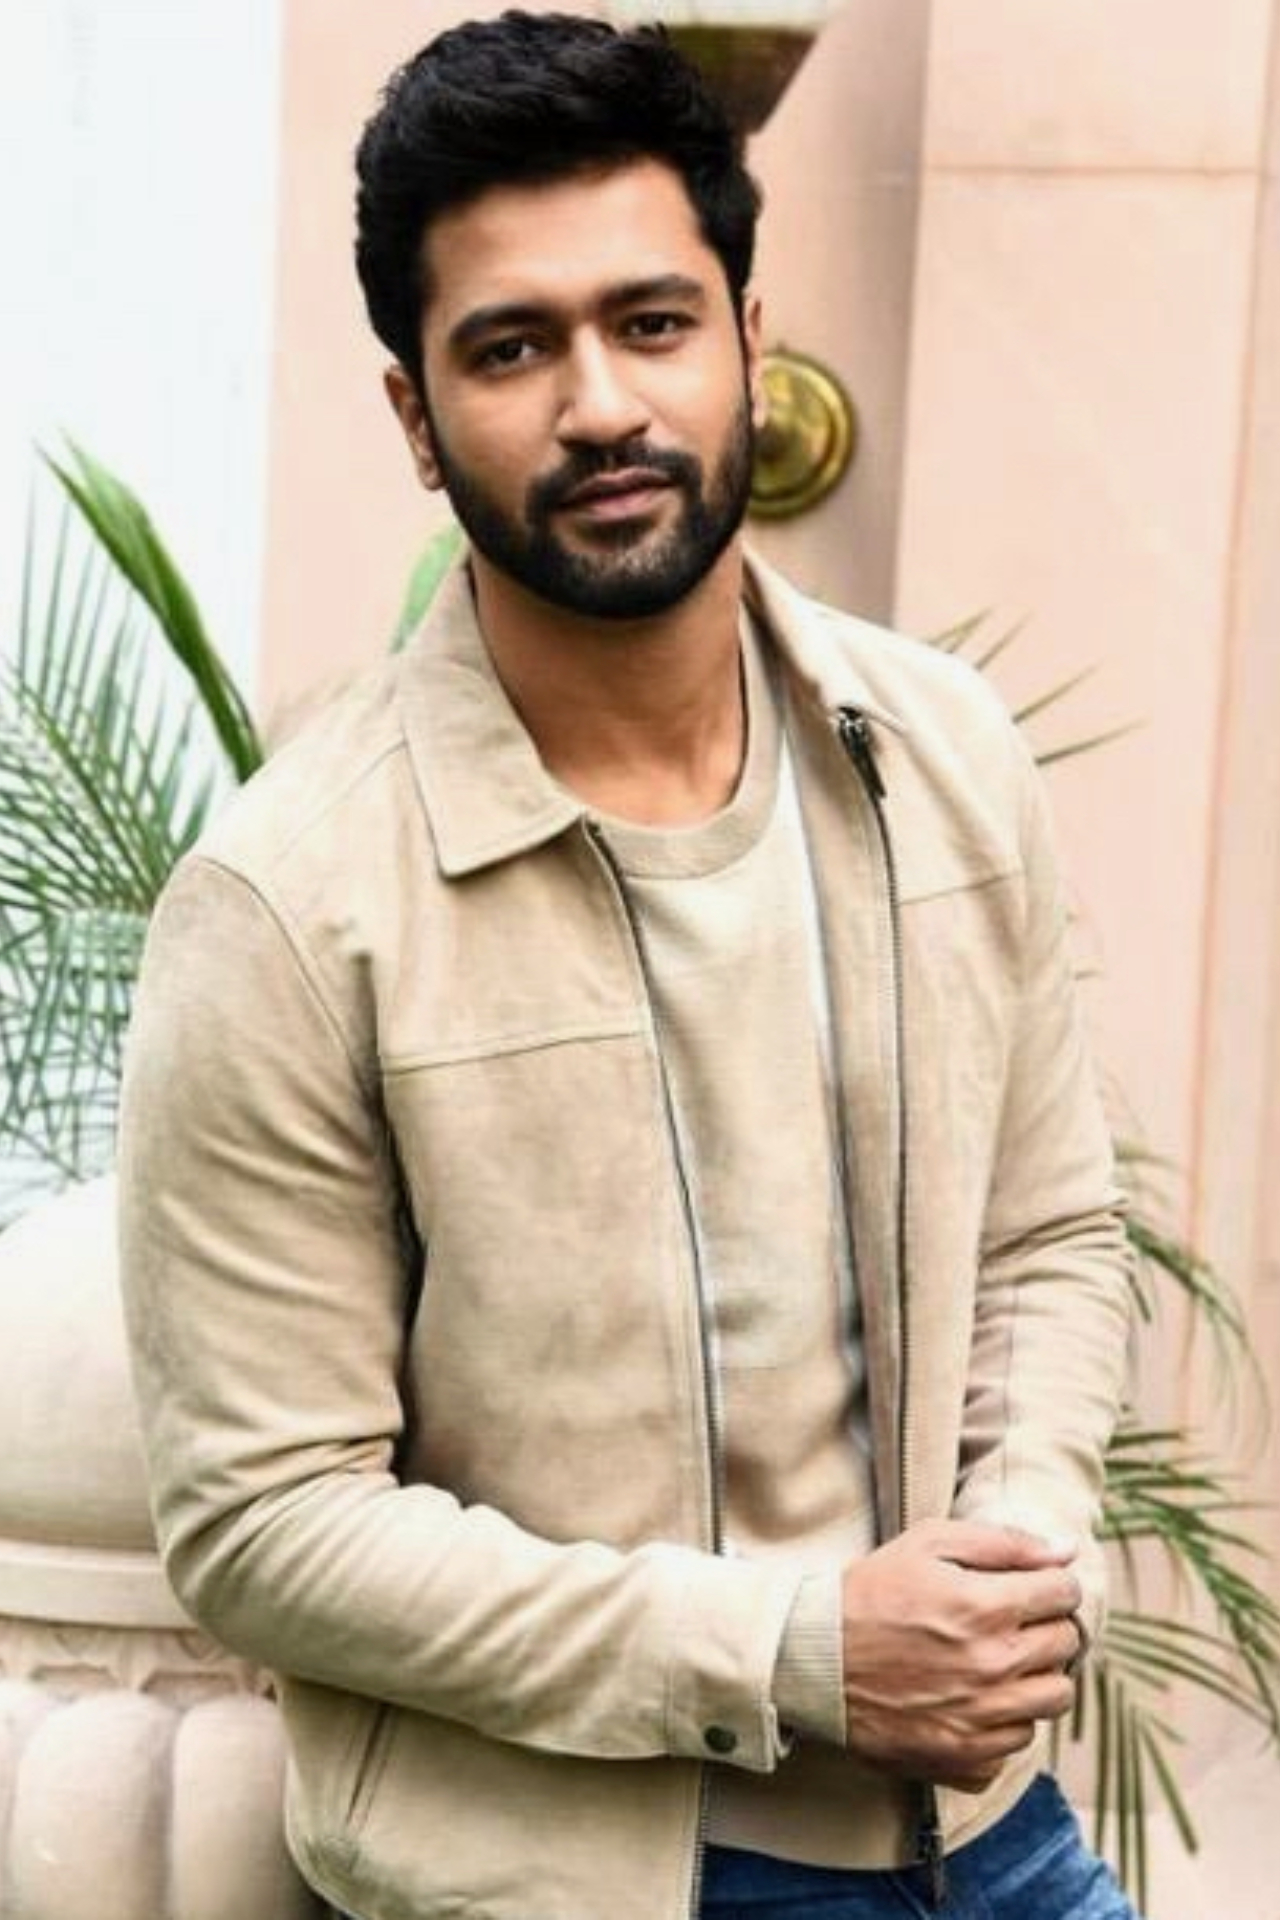 Vicky Kaushal won the most deserved national award for Uri The Surgical Strike